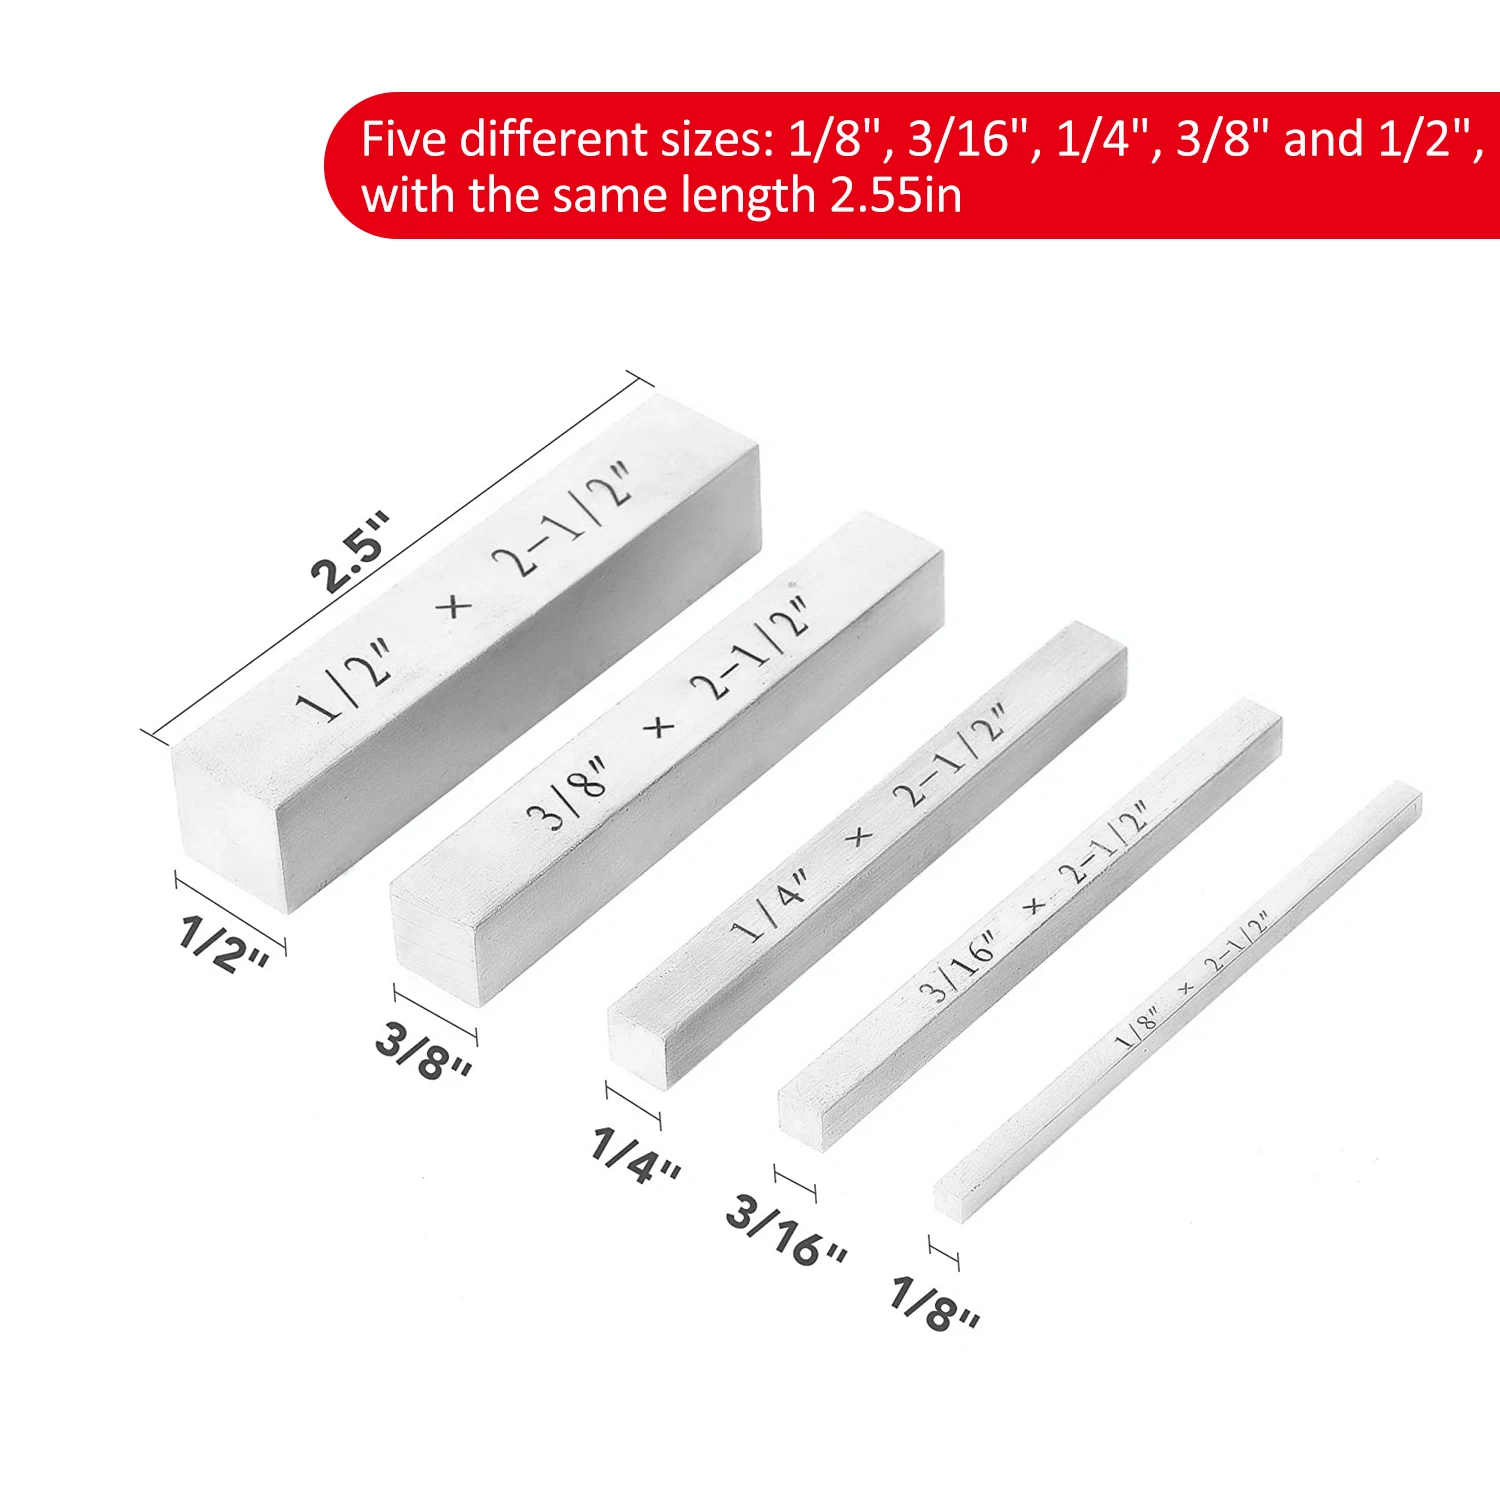 

KKmoon 5pcs Gauge Blocks High Precision with Engraved Size Markings Machinist Tool Woodworking Tool for Height Distance Setup